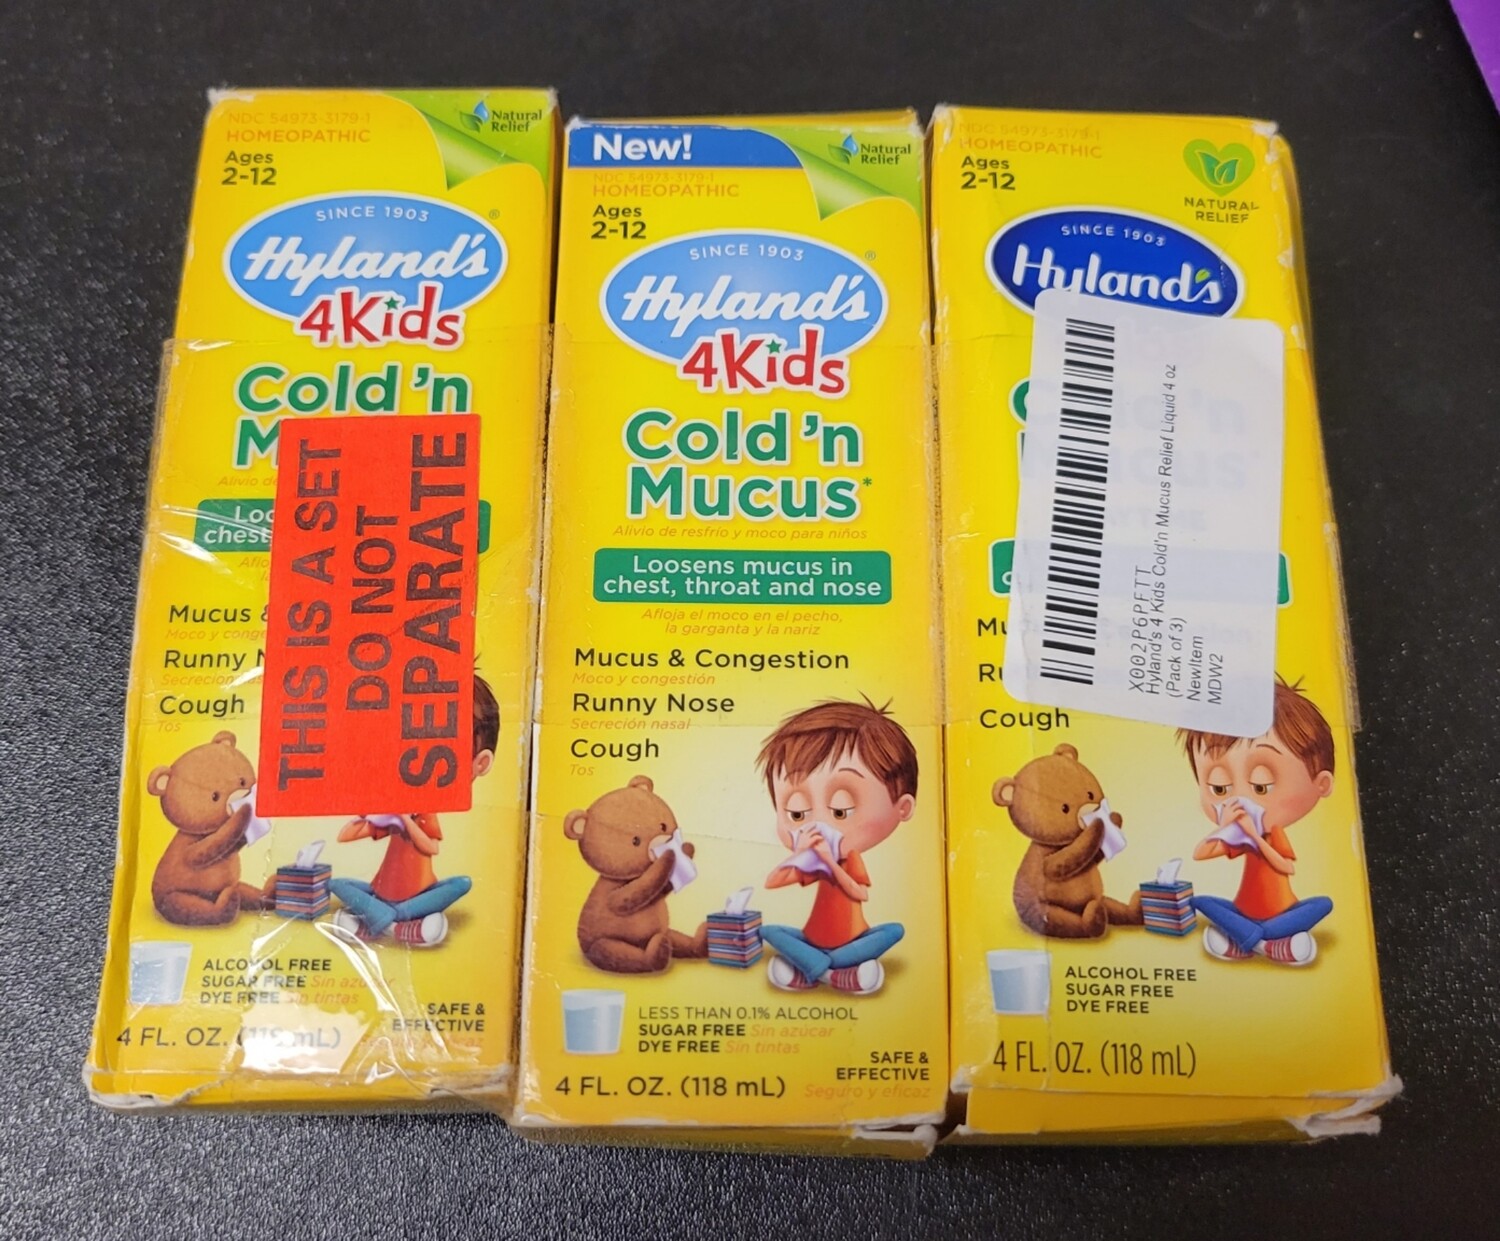 Hyland's 4 Kids Cold 'N Mucus Three-Pack of 4 Fluid Ounce Bottles